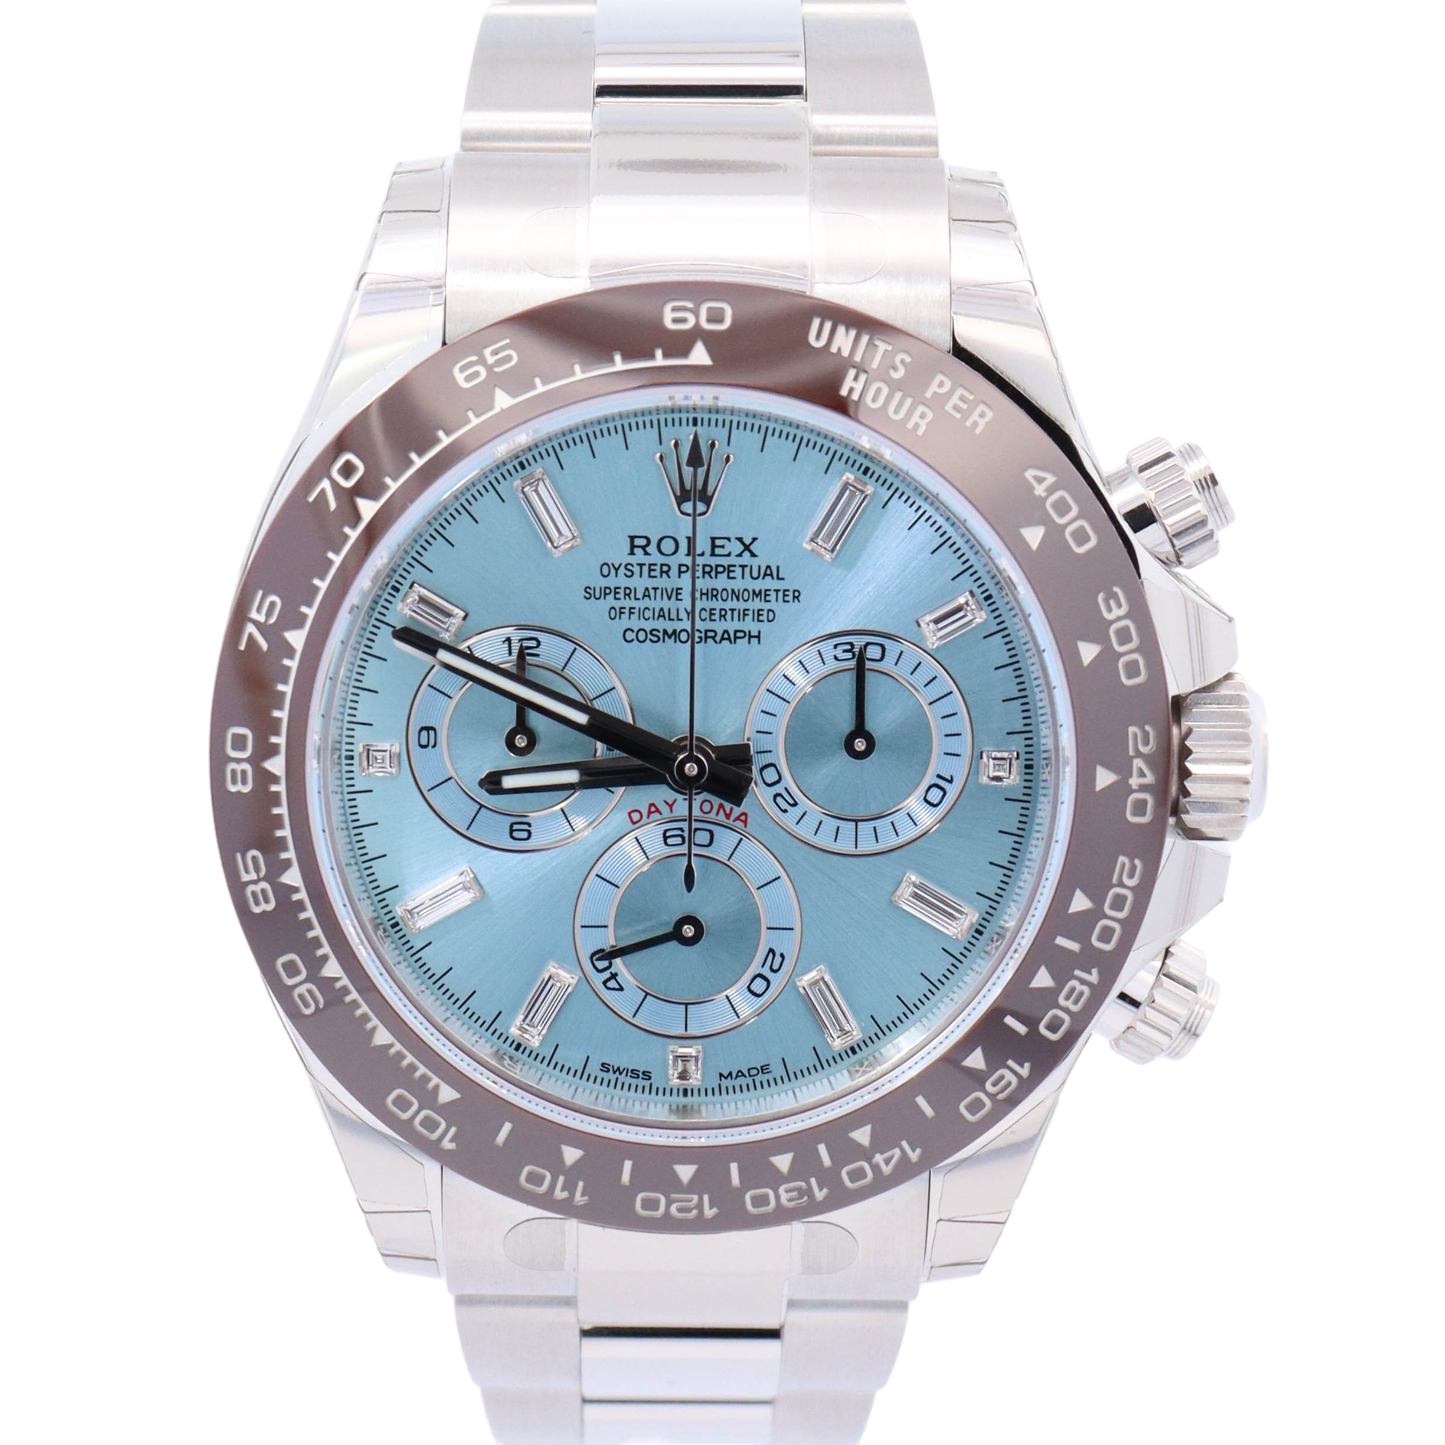 Rolex Daytona 40mm Platinum Ice Blue Baguette Dial Watch Reference# 116506